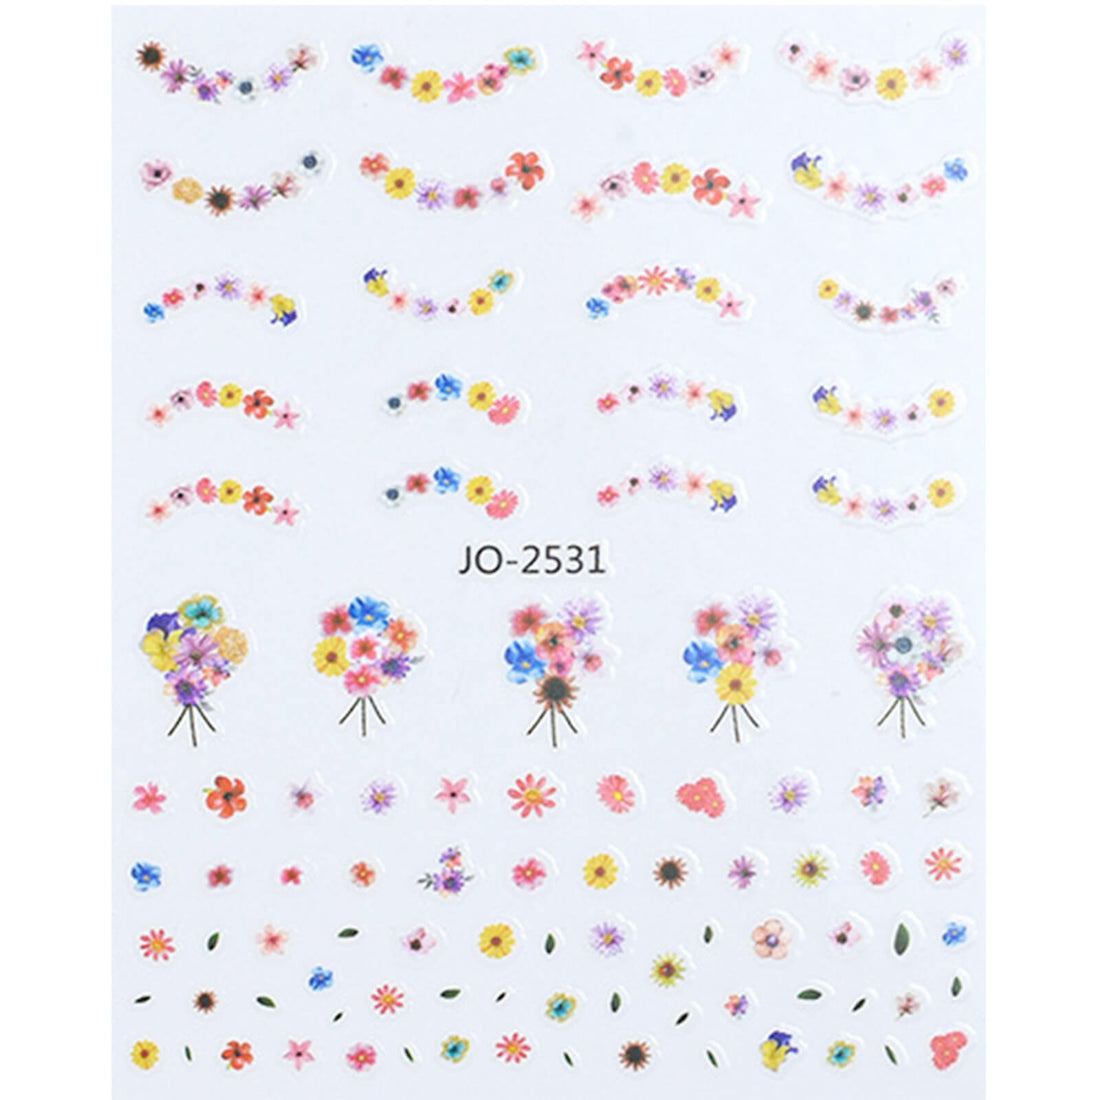      mini-colorful-nail-art-flower-stickers-floral-2531